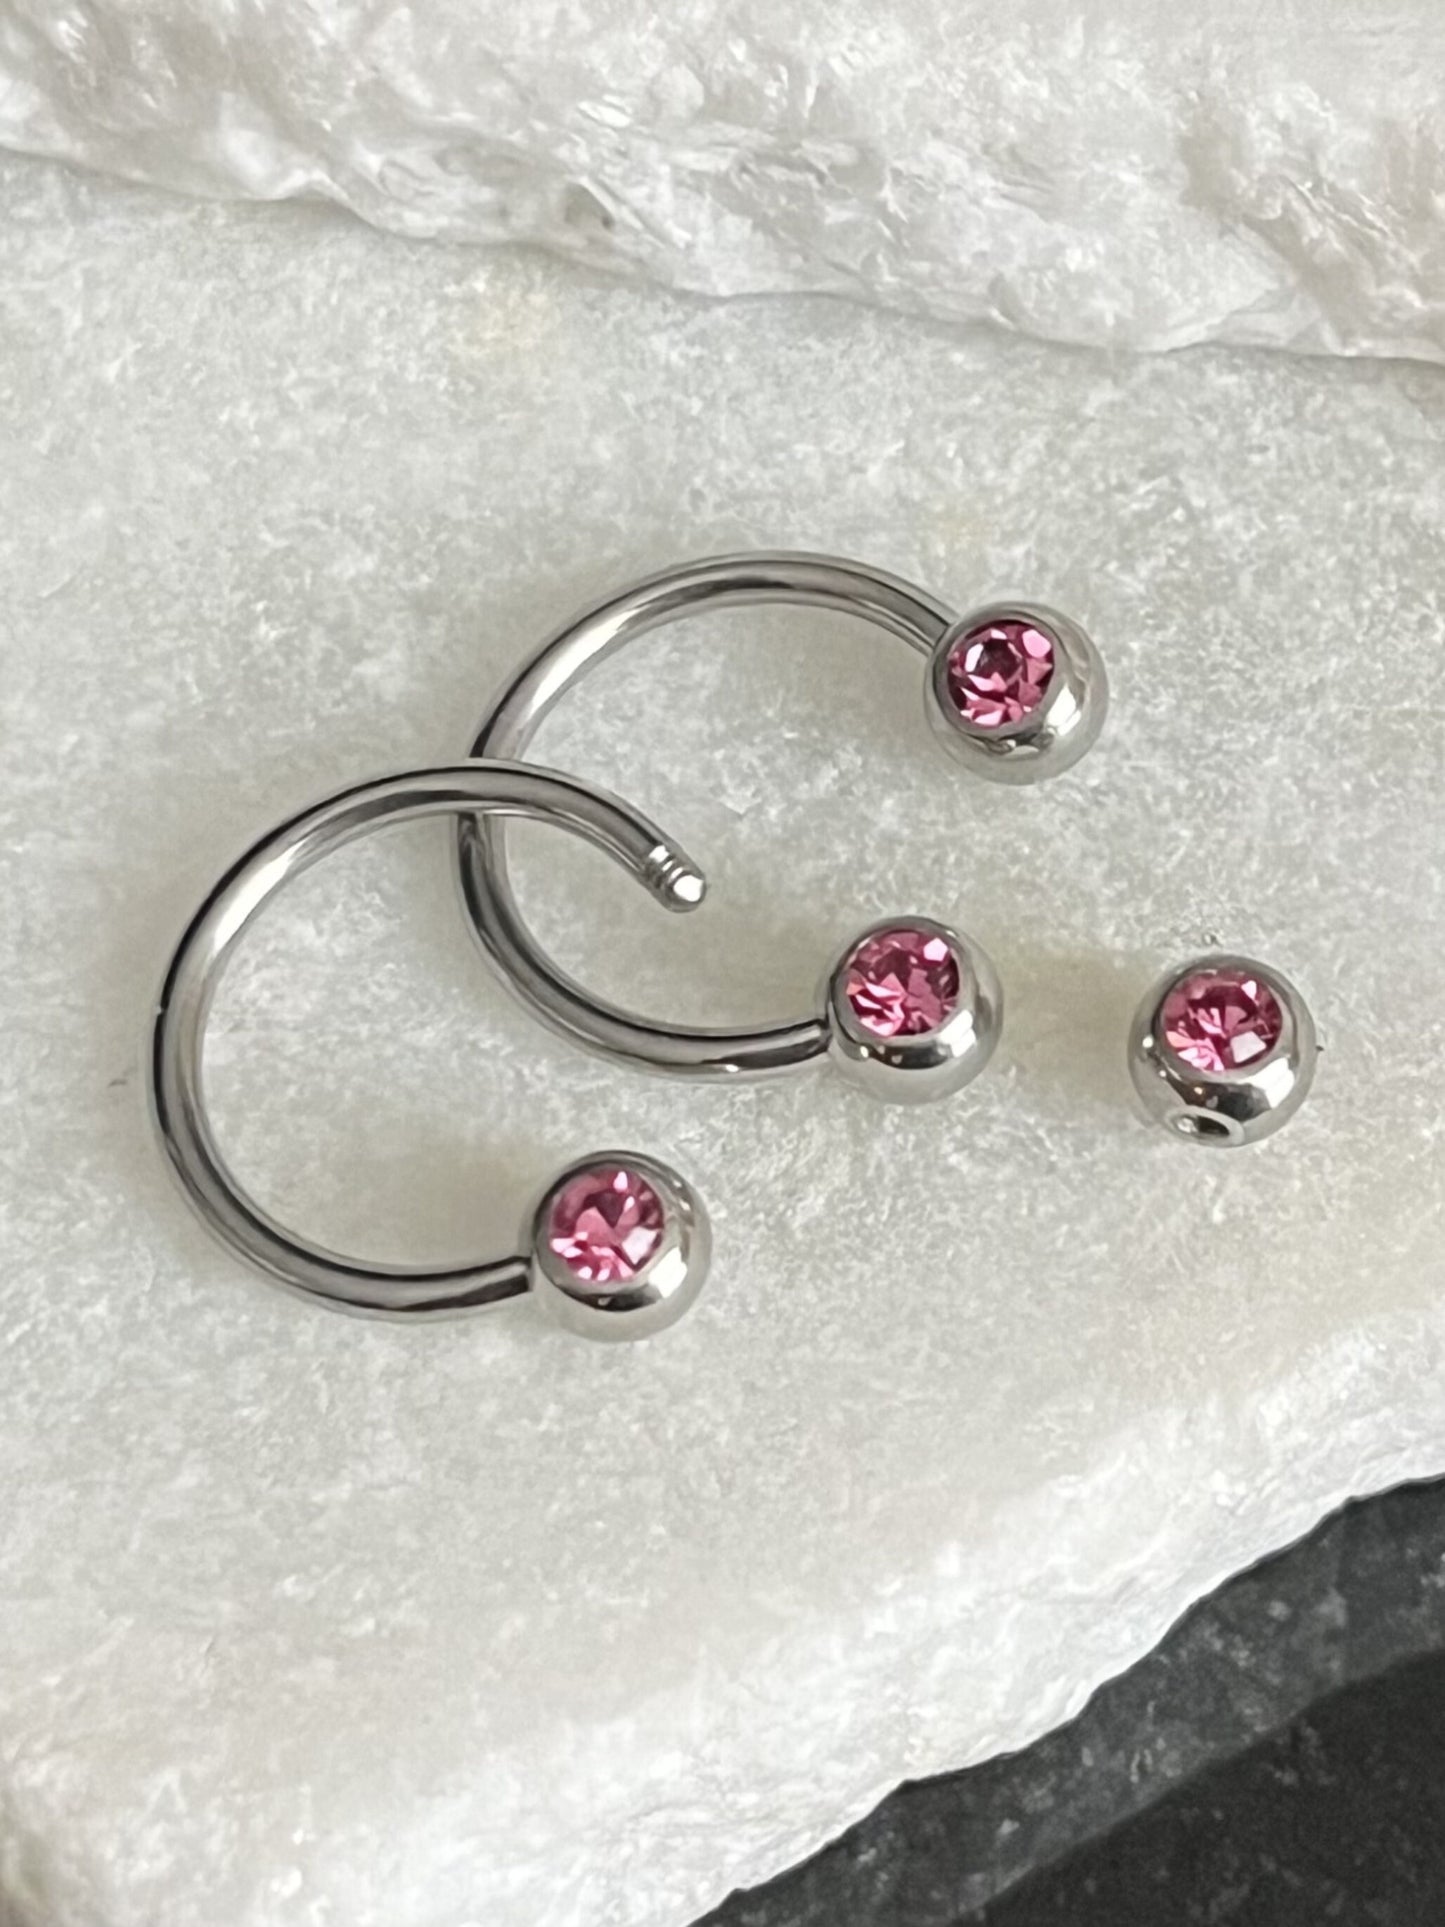 1 Piece Stunning Front Facing CZ Gems 316L Surgical Steel Circular Horseshoe Septum Ring - 16g or 14g - Available in a Variety of Colors!